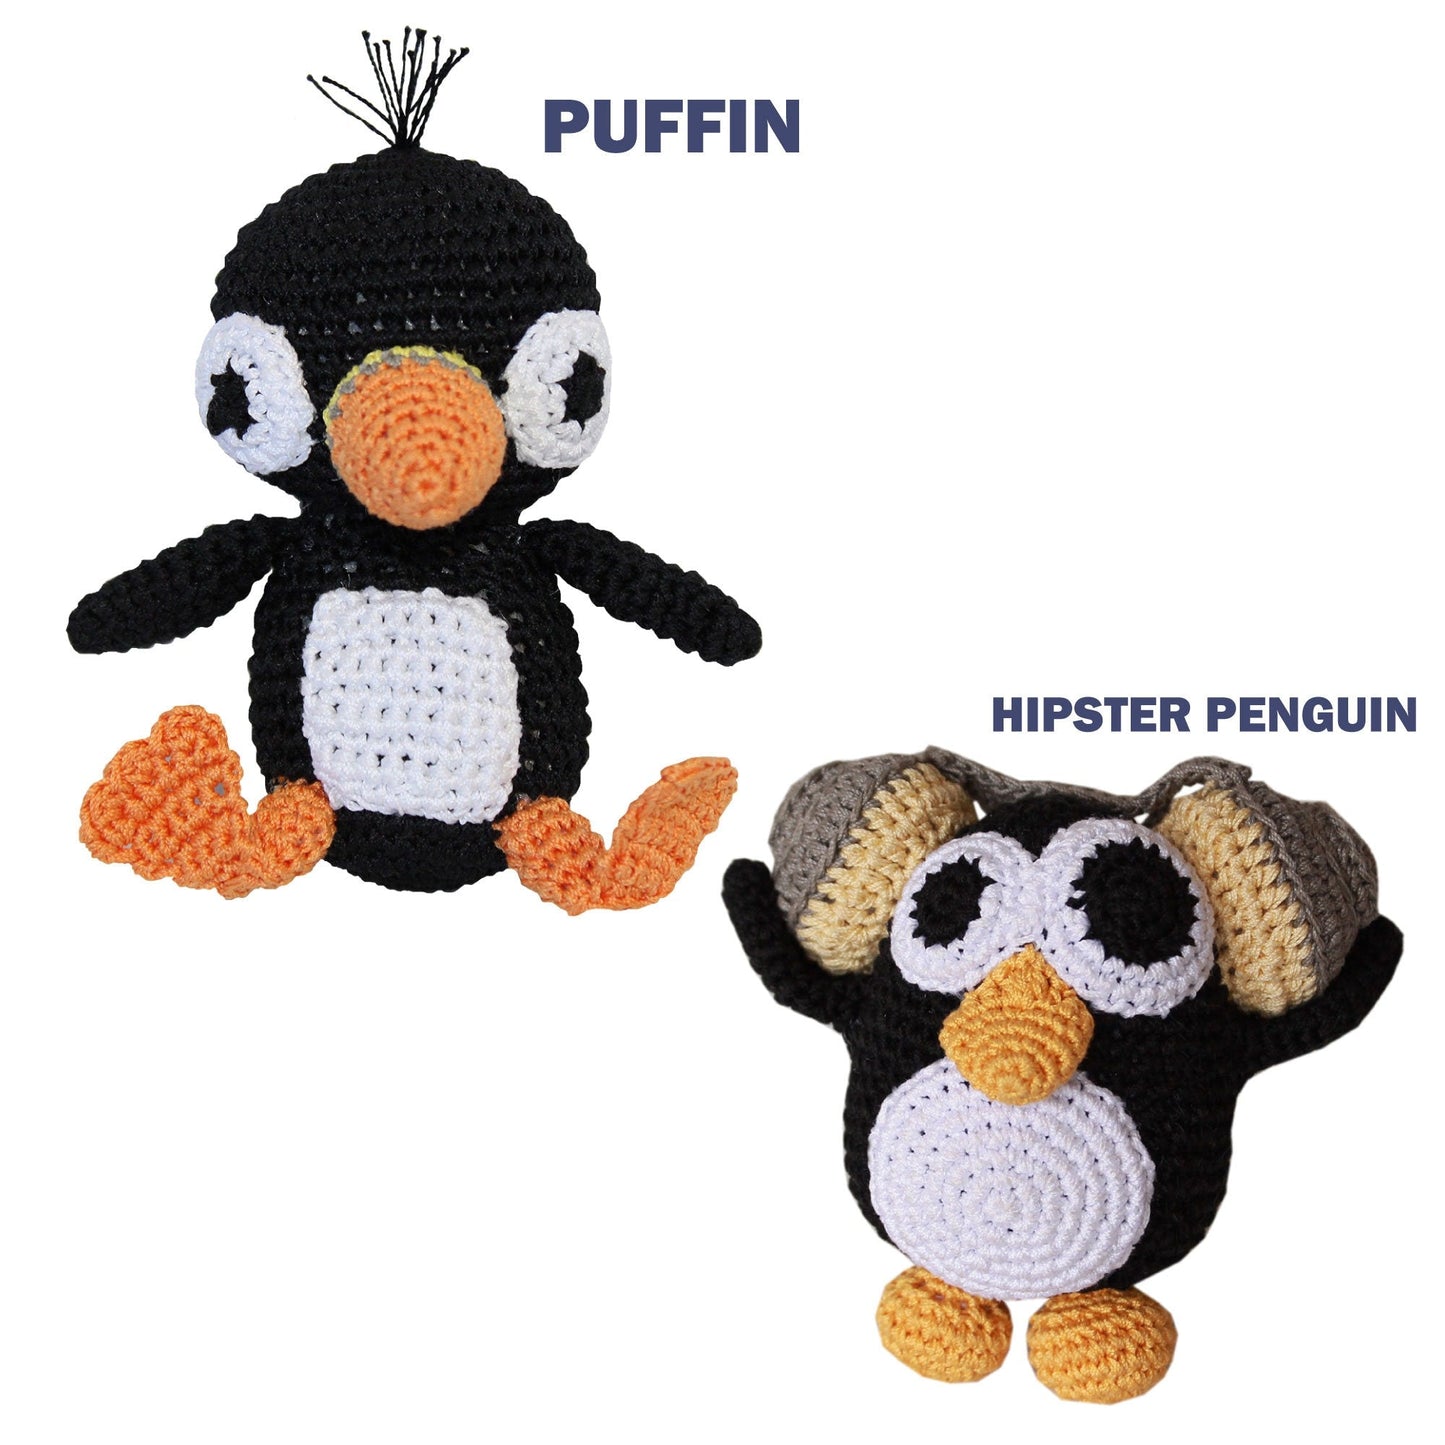 Knit Knacks Organic Cotton Pet & Dog, Puffin or Hipster Penguin-1